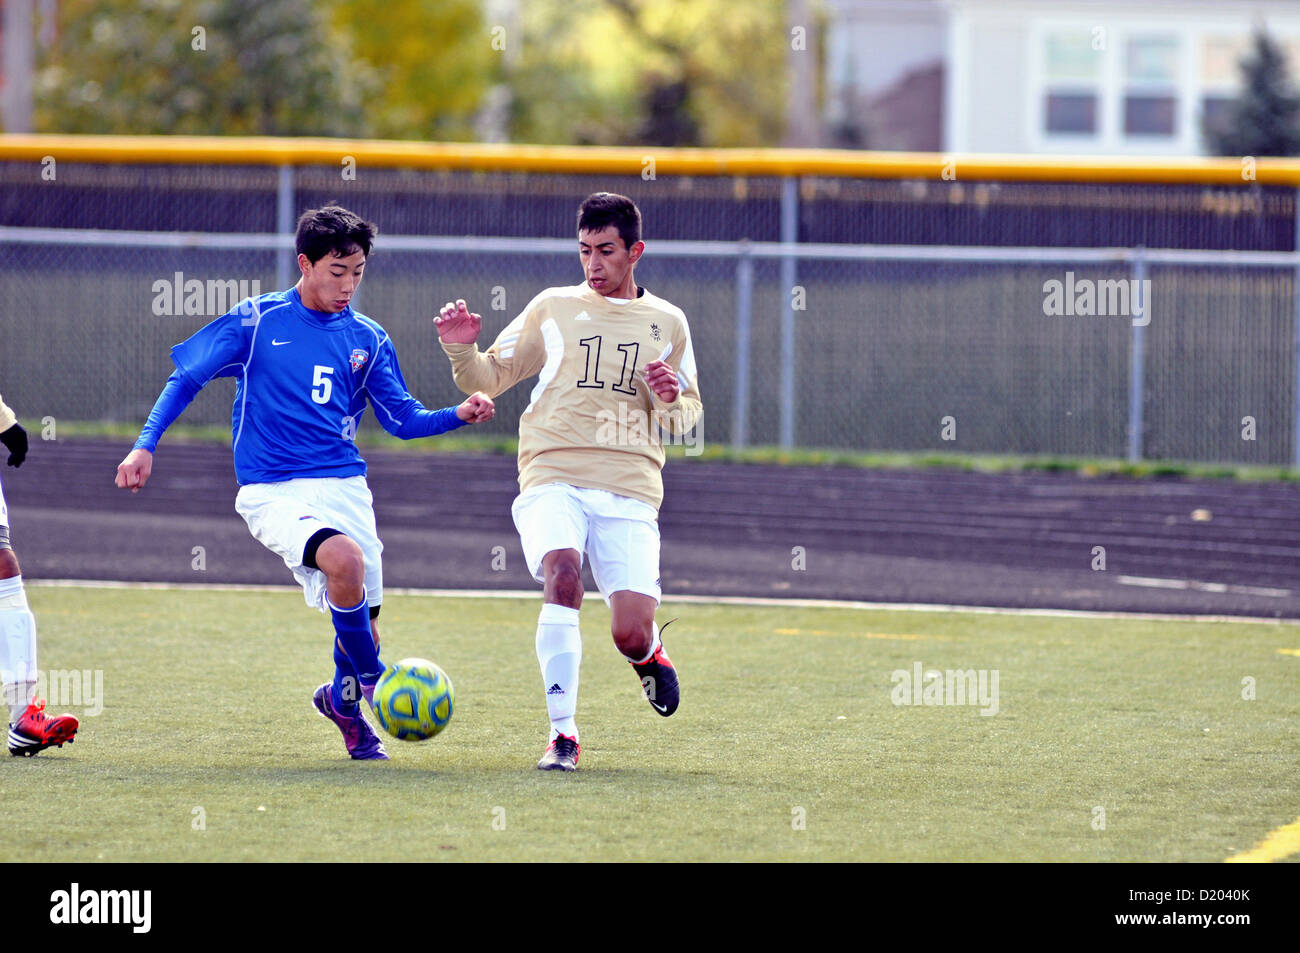 Soccer players compete in the corner deep at the end of the pitch during a high school match. USA. Stock Photo